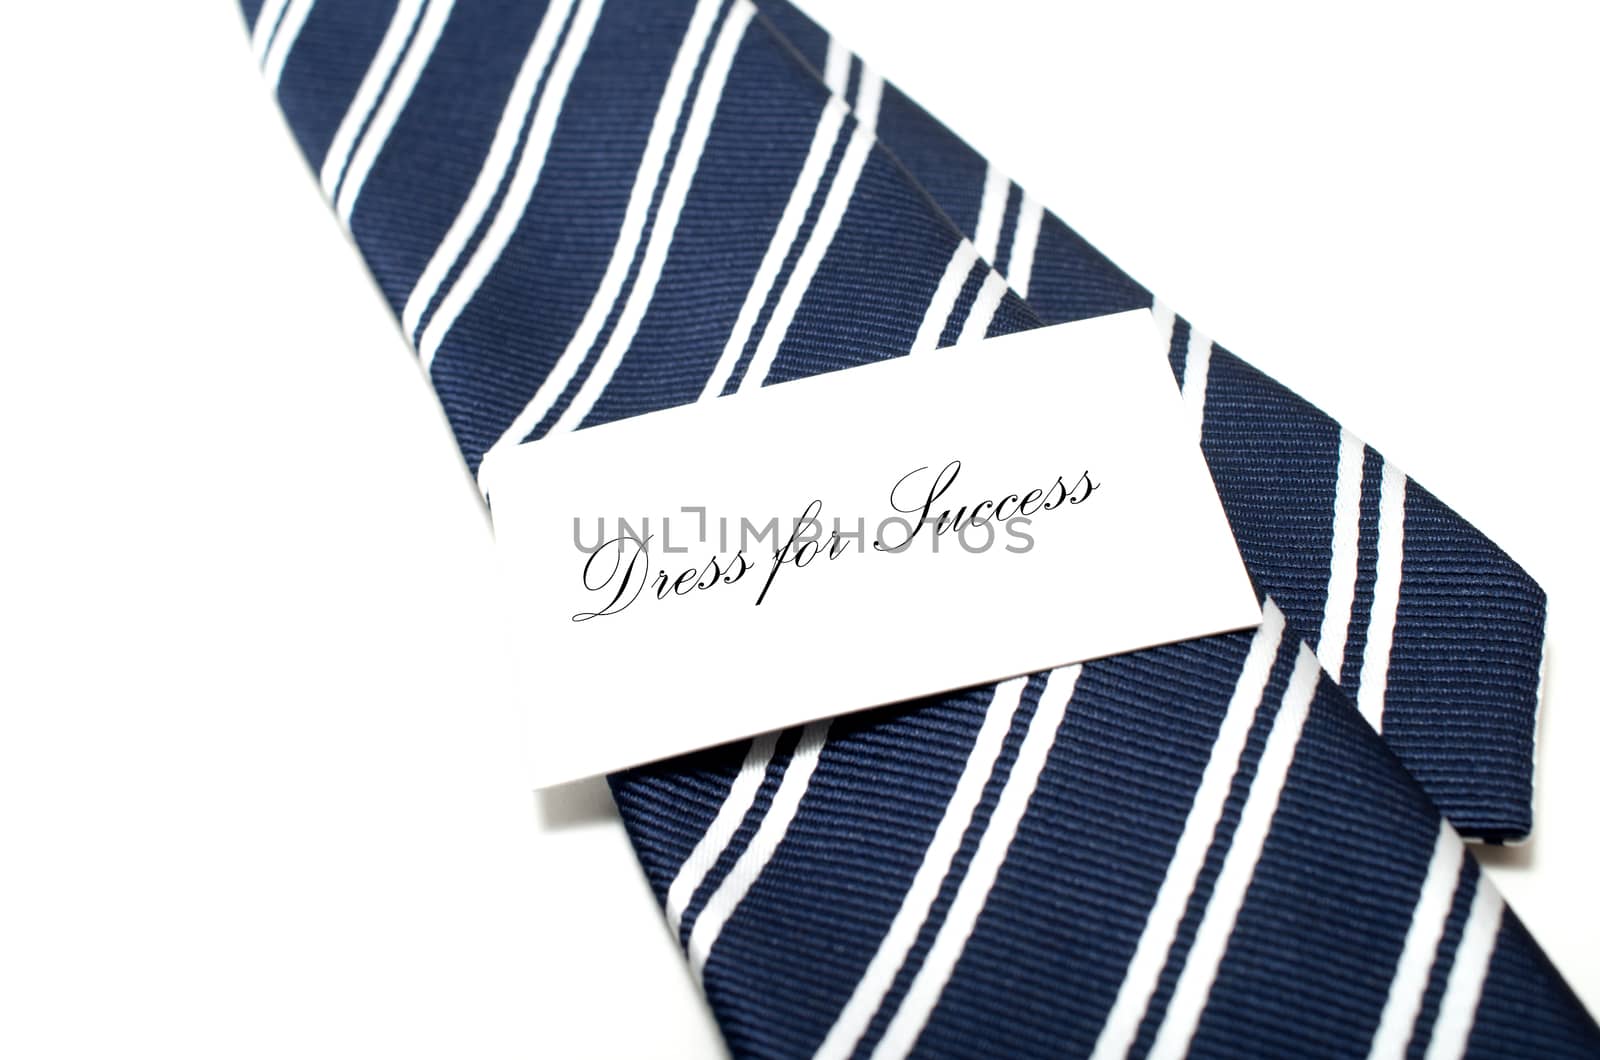 Dress for success tag on blue tie over white background